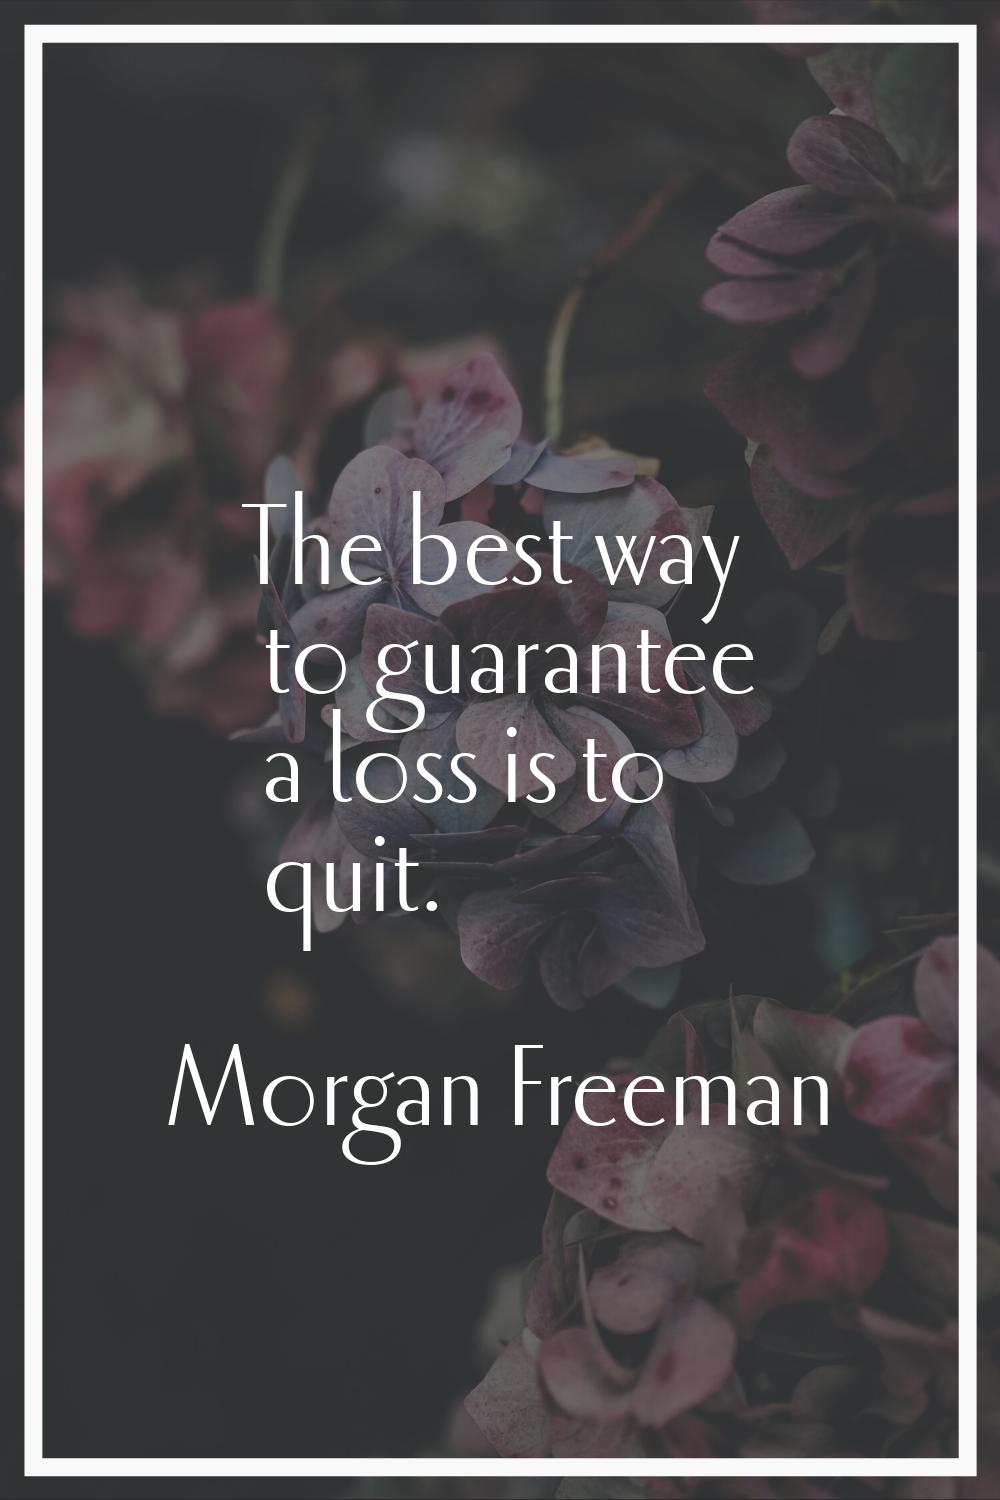 The best way to guarantee a loss is to quit.